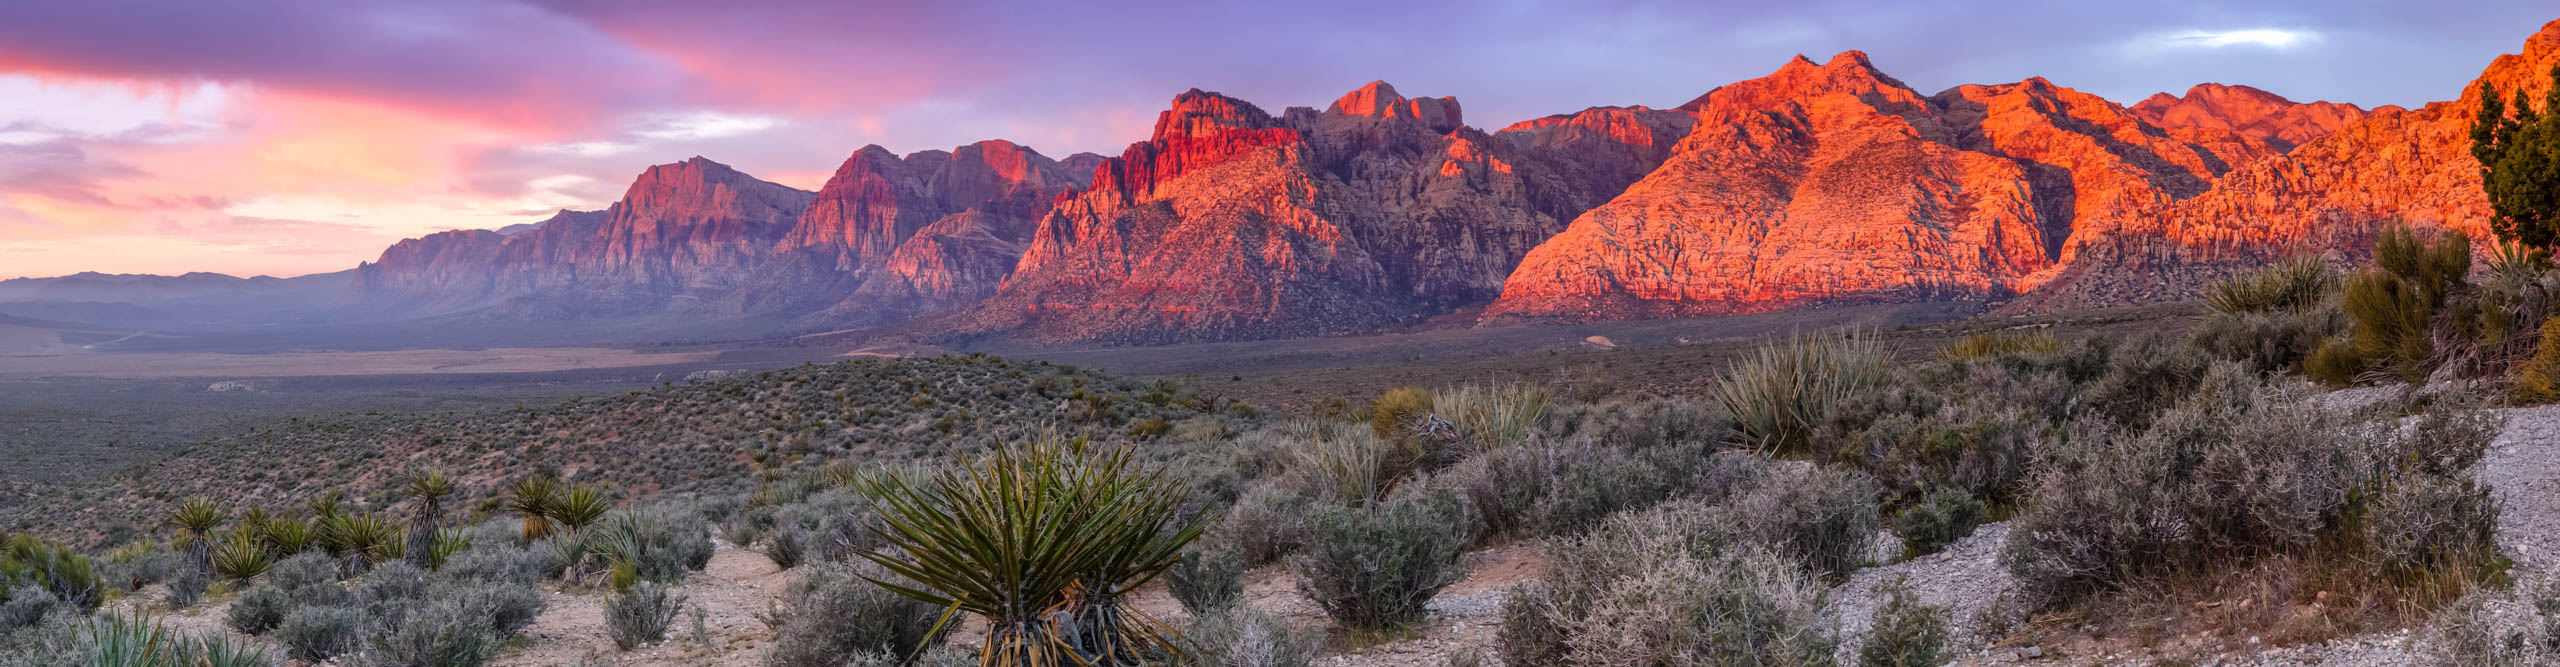 Sunset at Red Rock Canyon, with red mountains, a purple sky, and fluffy clouds, Las Vegas, Nevada